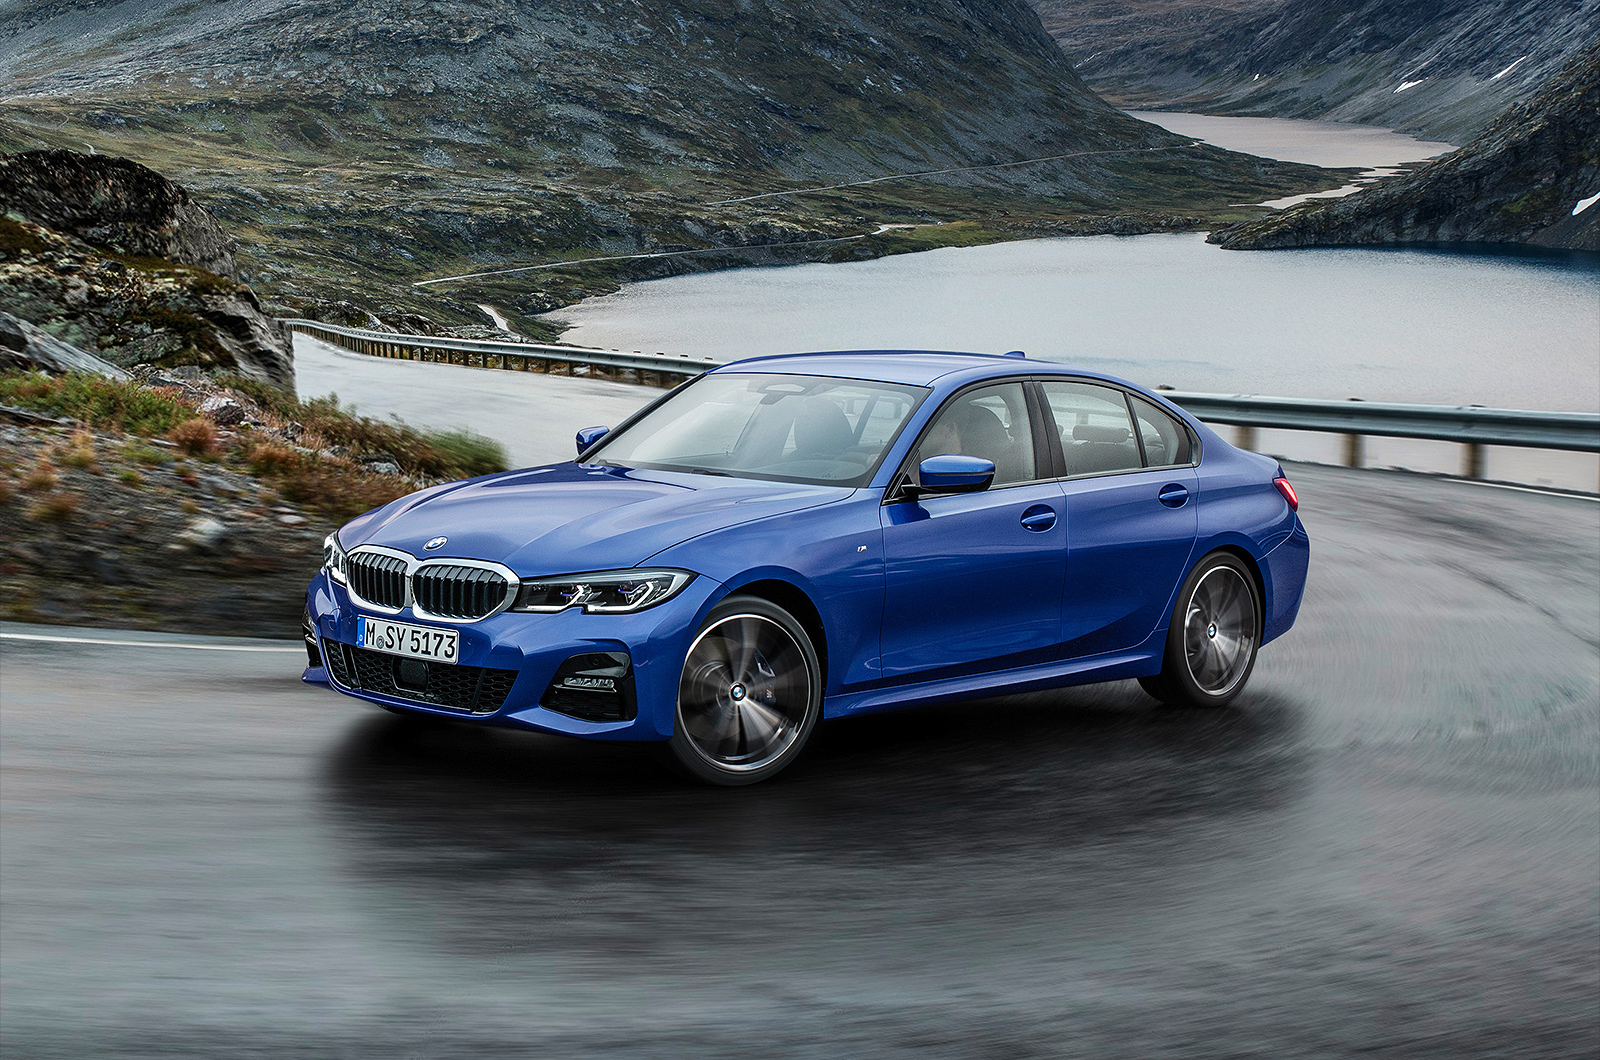 <p>The 3 Series has come to <strong>define every era</strong> it's sold through, from funky 1970s saloons through to chisel-jawed 1980s estates and convertibles, and into the clean-cut noughties. This evolution has been entirely planned, sometimes with <strong>bold steps forward</strong> and occasionally with gentle revisions.</p><p>It’s kept the 3 Series at the forefront of its class for sales and driver appeal.</p>